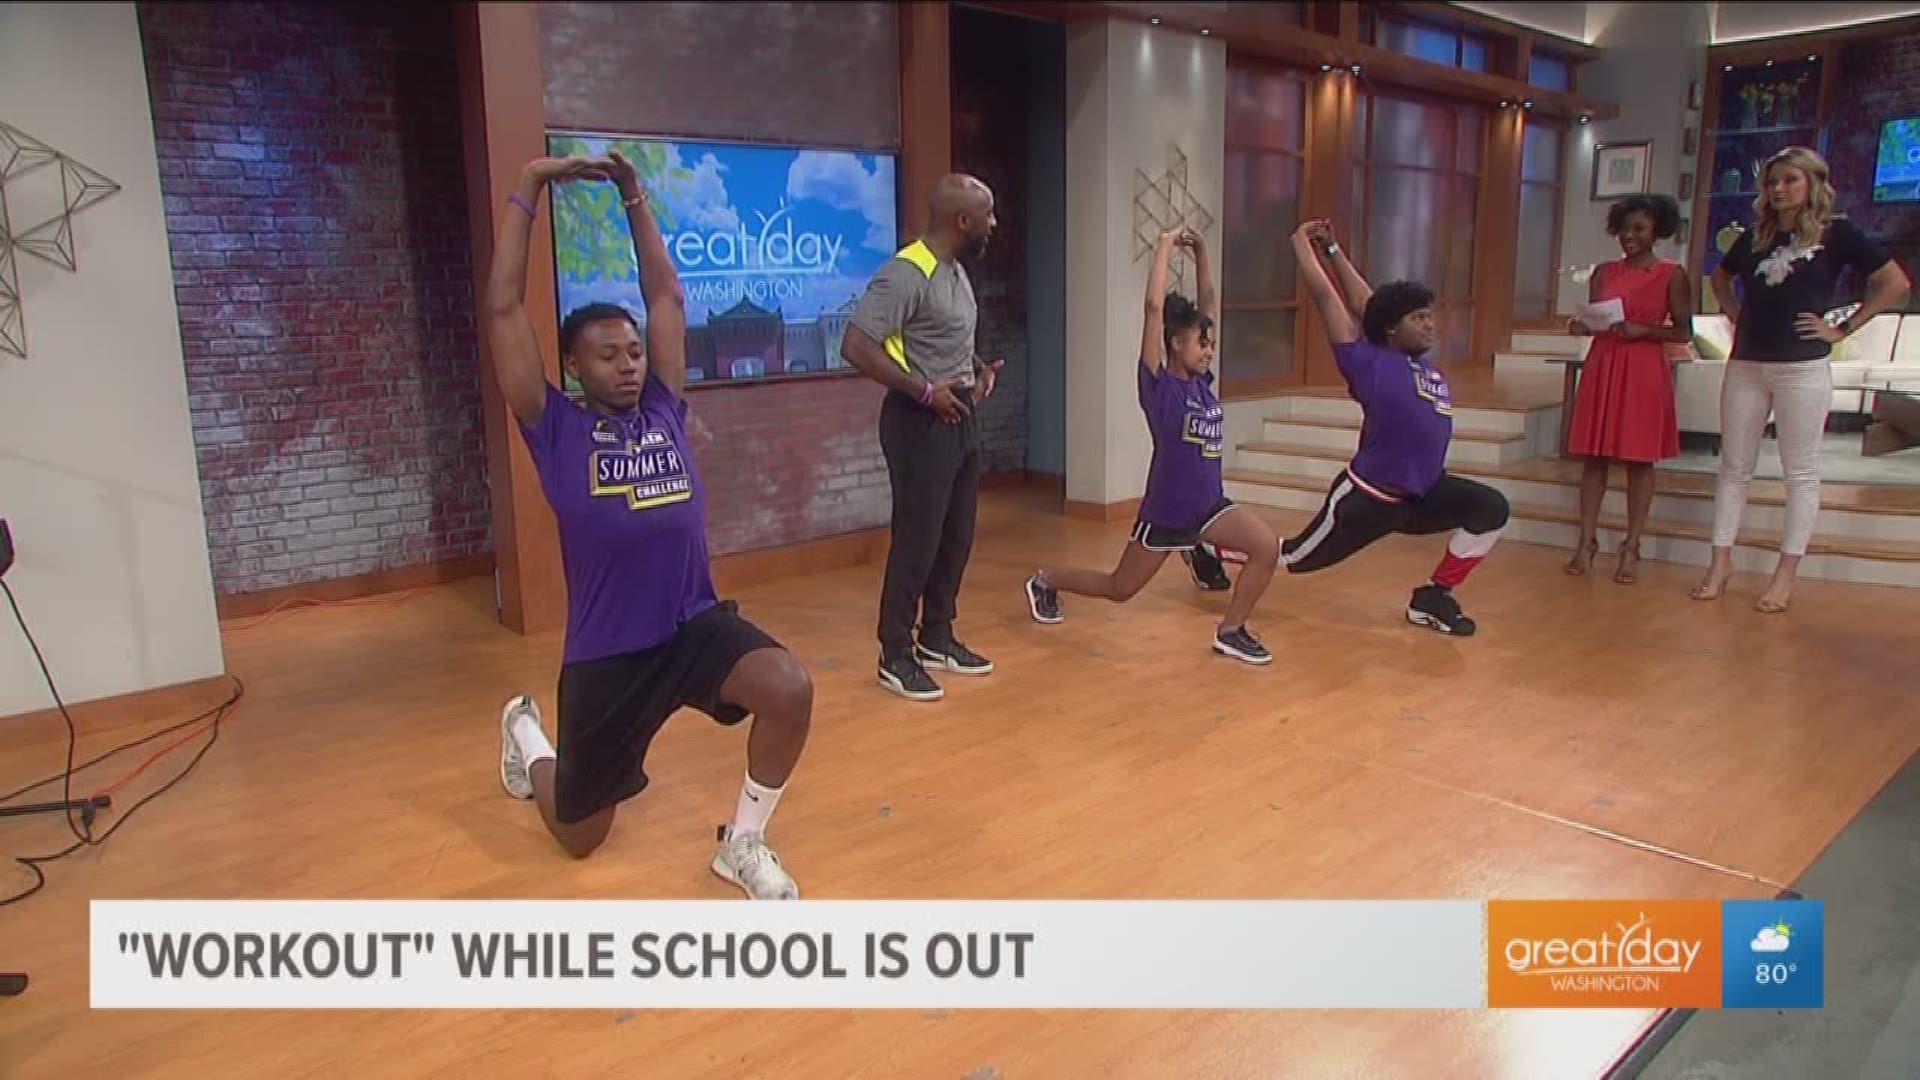 Theodore Savage, fitness training director at Planet Fitness is here to demonstrate a few summer workouts teens can do at home. All teens ages 15-18 are encouraged to participate in the Teen Summer Challenge which grants participants free access to workout in any Planet Fitness location until Sept. 1.